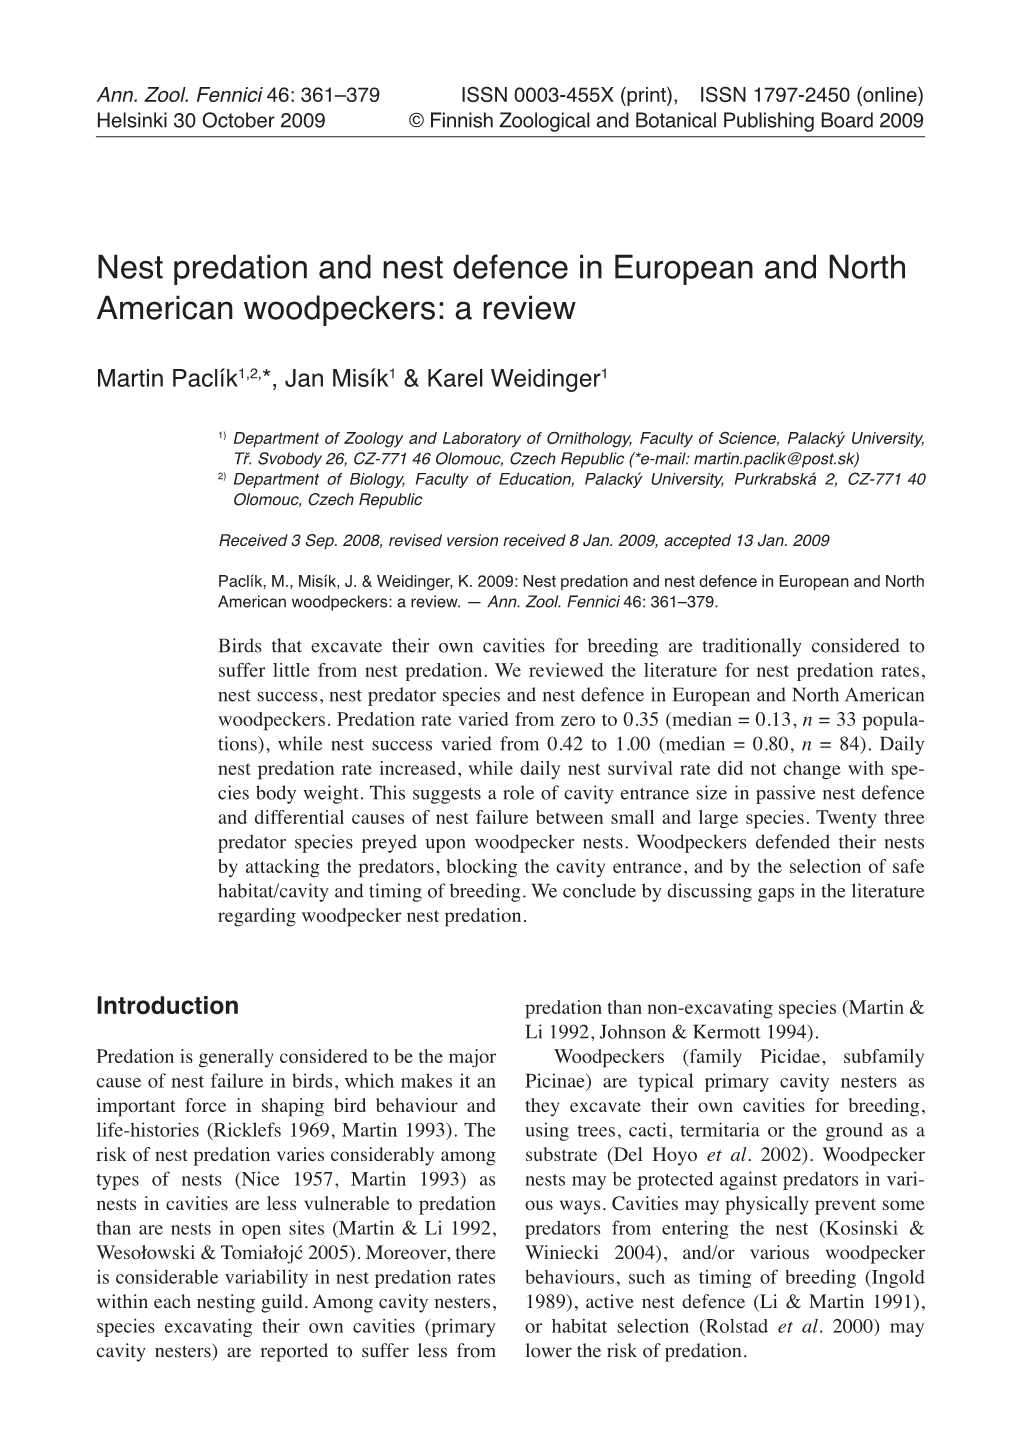 Nest Predation and Nest Defence in European and North American Woodpeckers: a Review